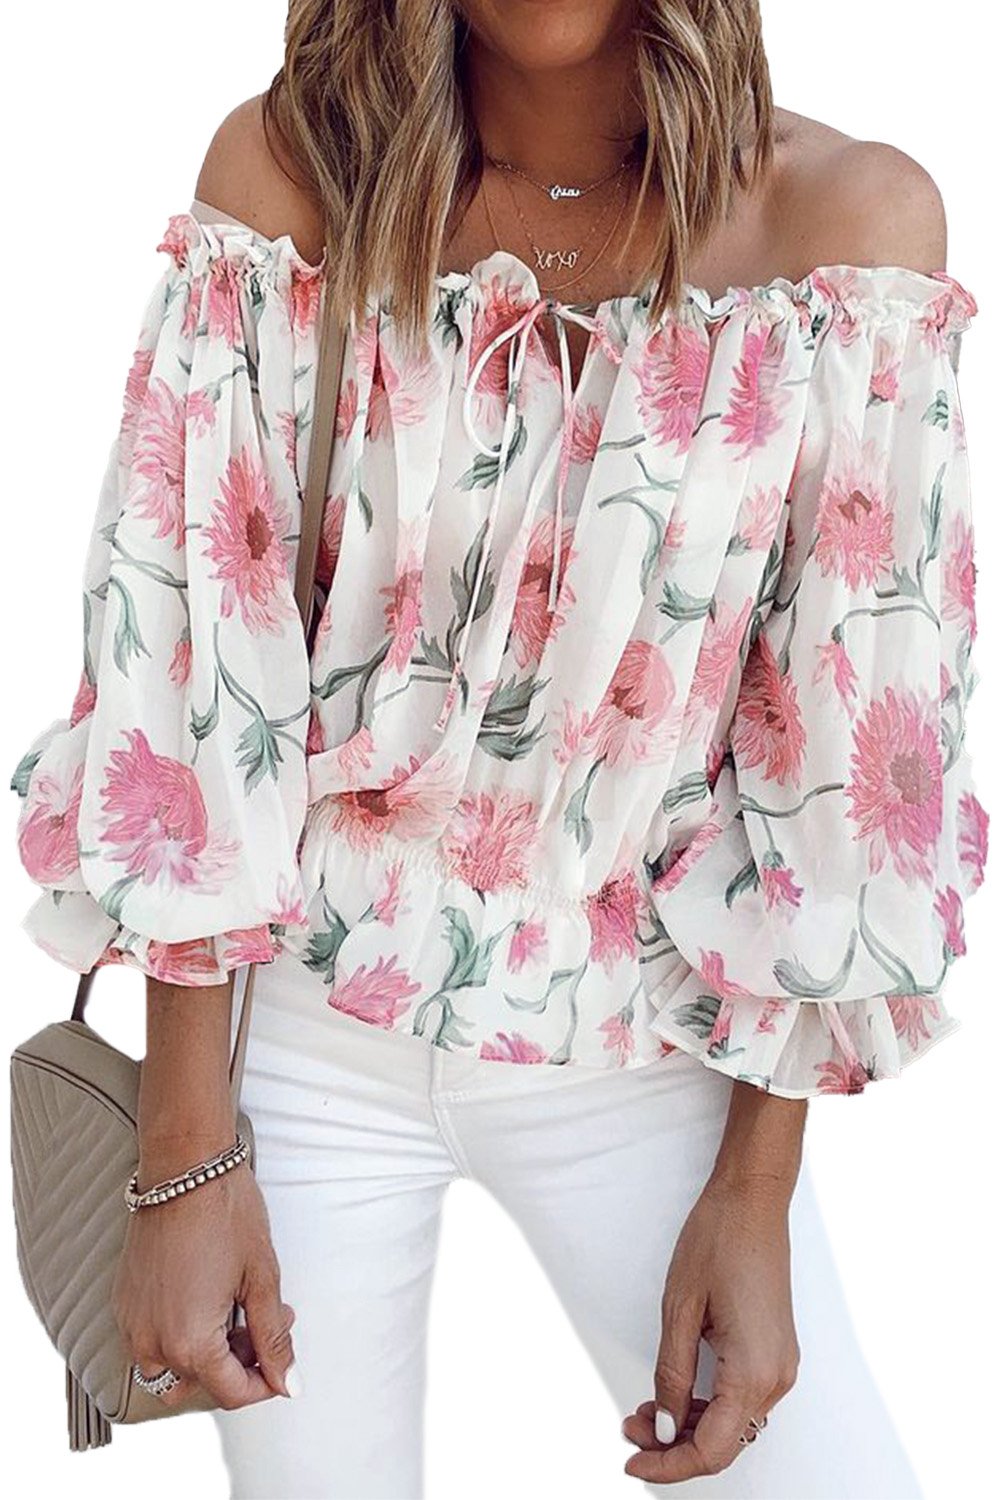 Blouse Blanc Rose Fleurie Chic Manches Longues Epaules Denudees 